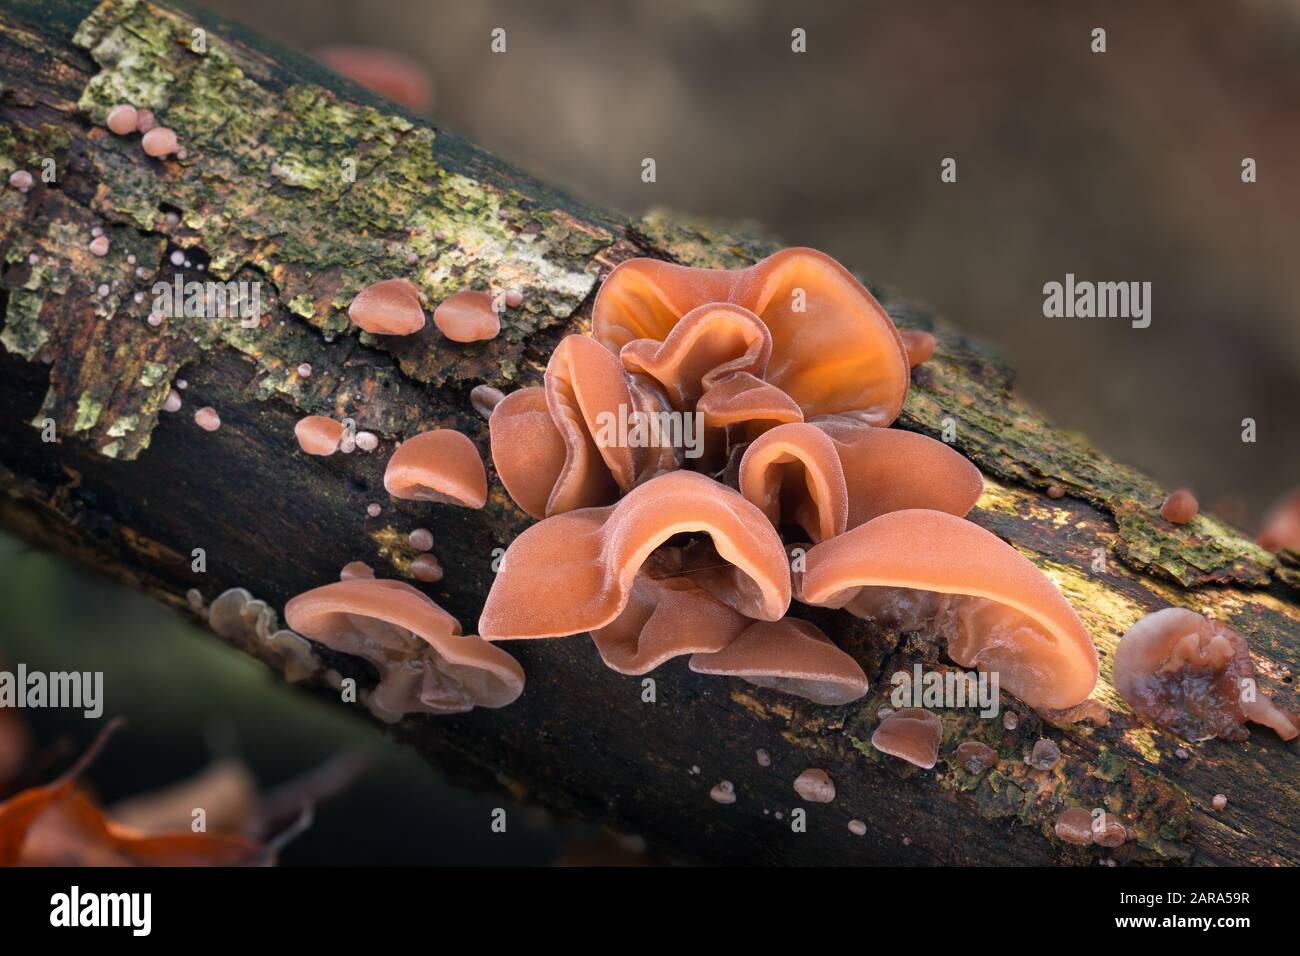 A tasty and healthy mushroom that grows on tree trunks. Seasonal delicacy. Stock Photo